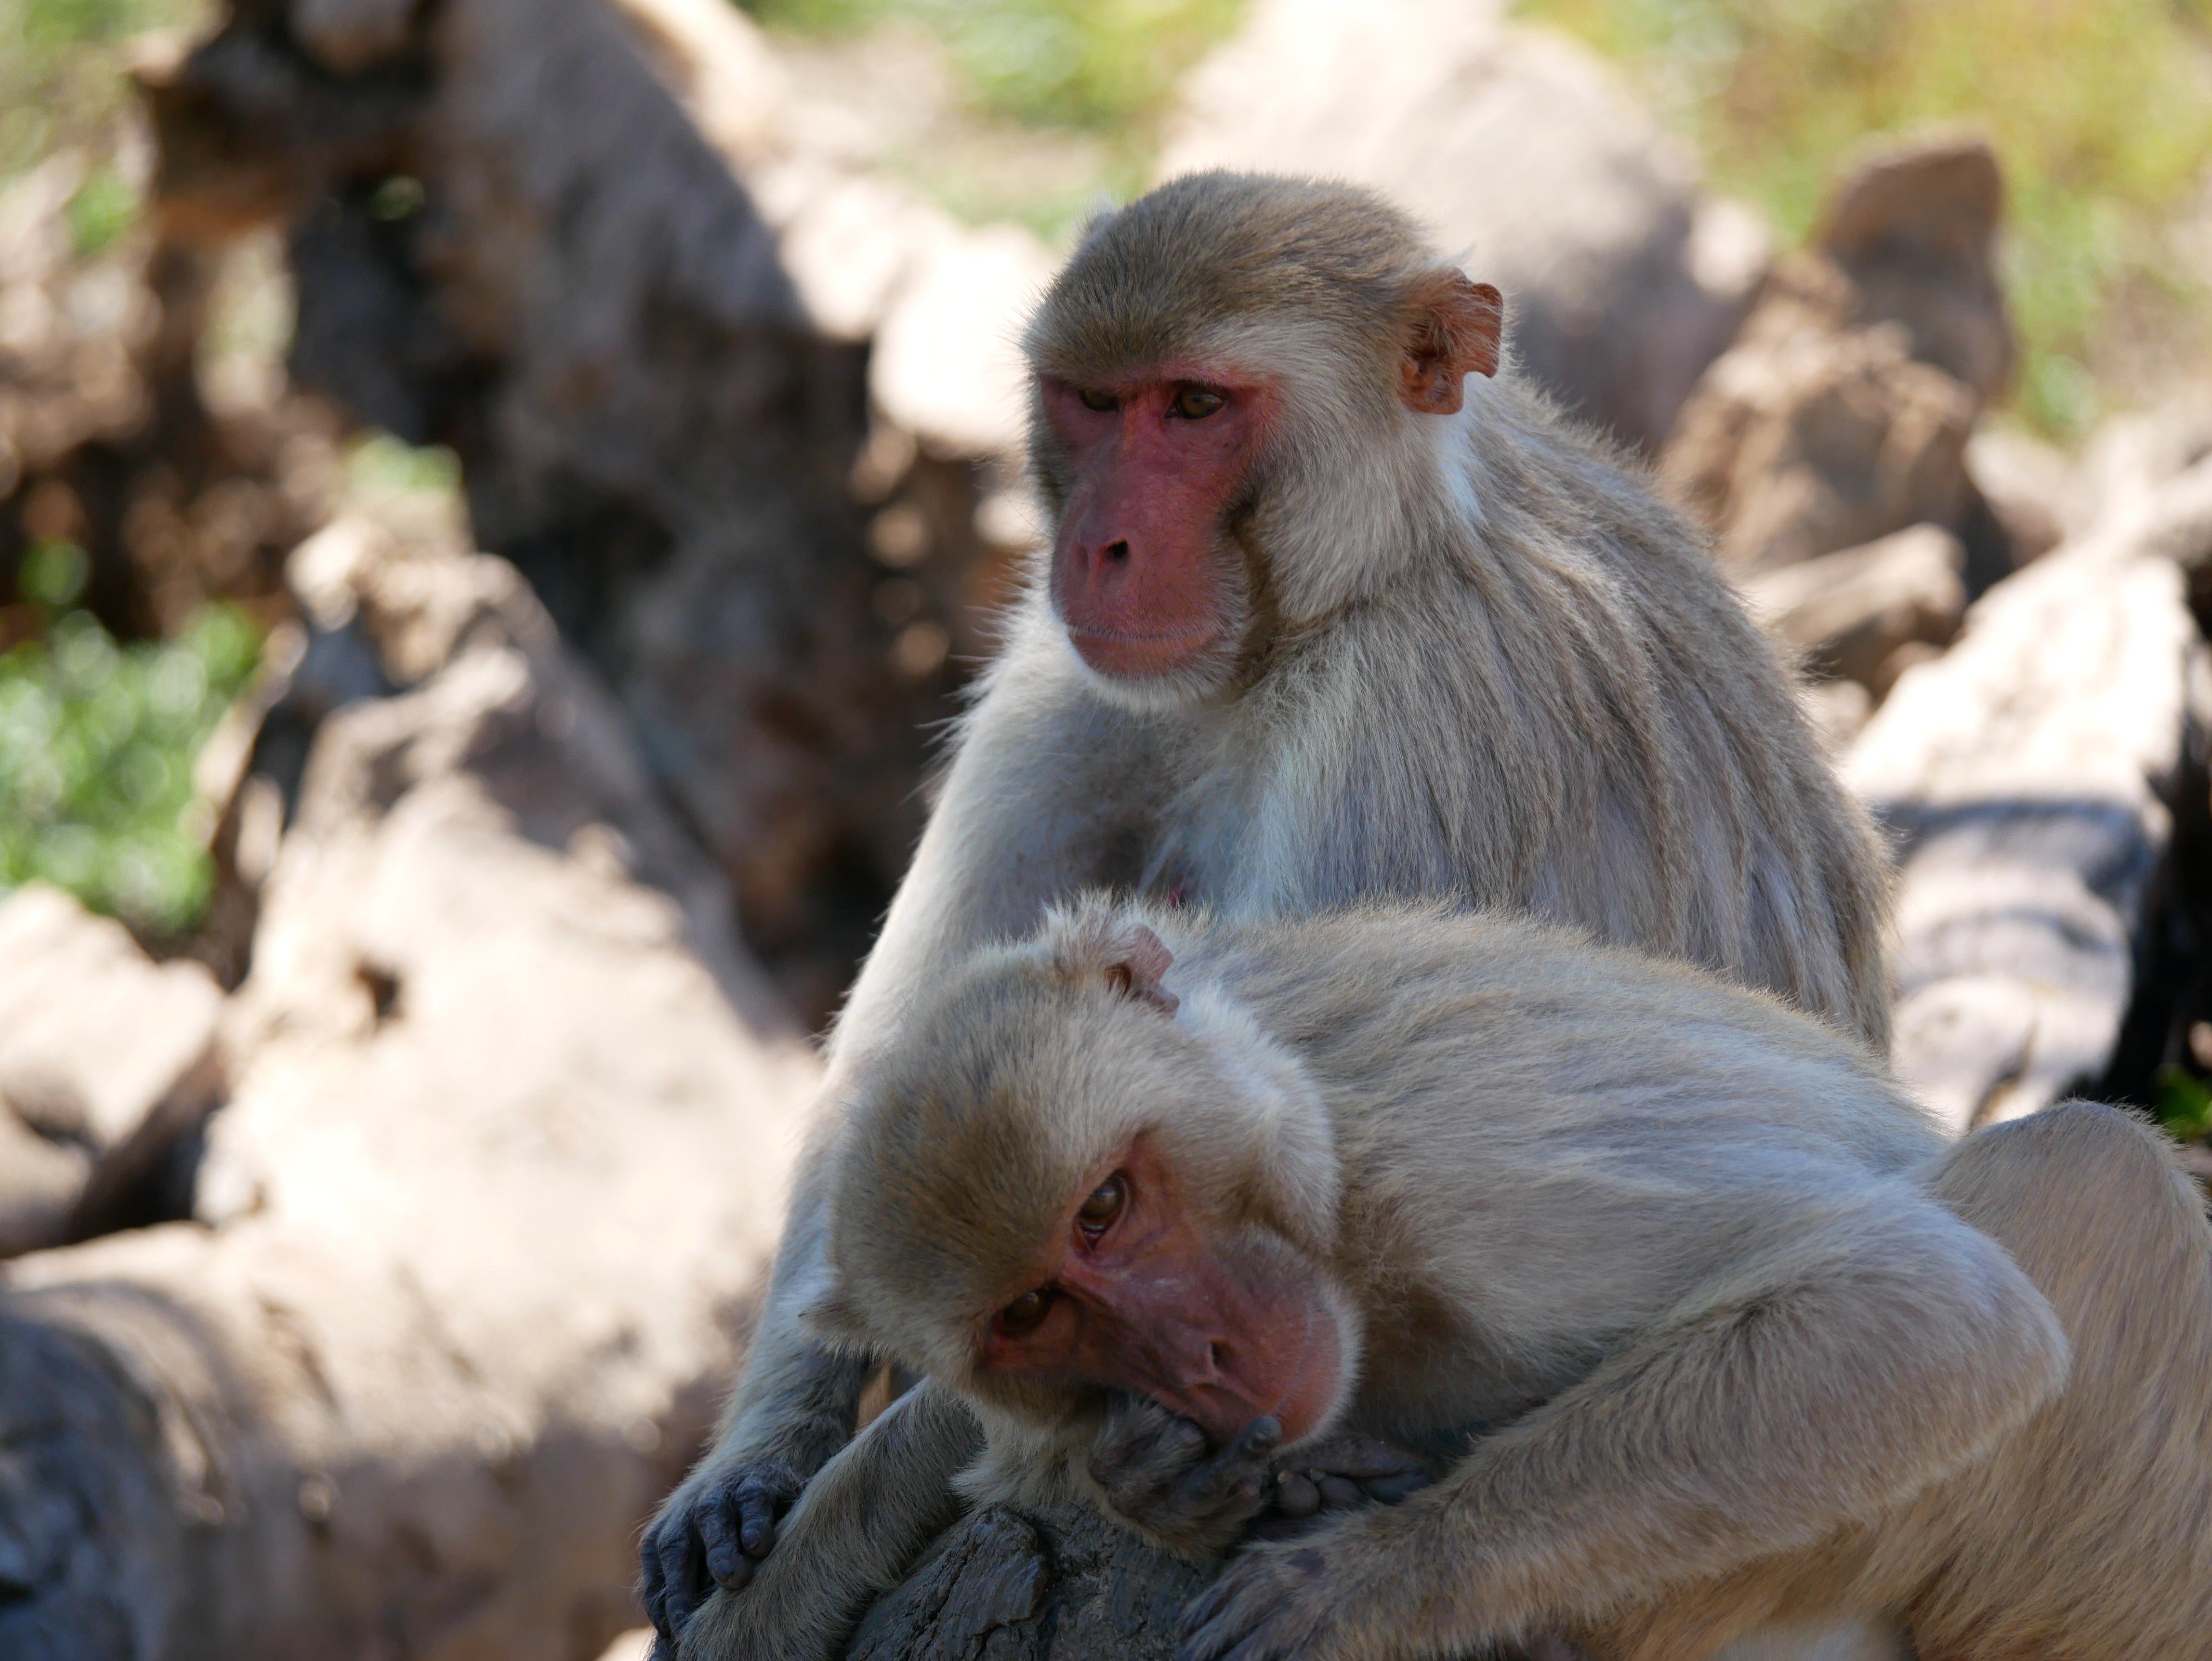 All Animals Girl Xnxx Porn Zoo 2 - Male Monkeys Have More Sex with Other Males Than with Females in This  Well-Studied Group | Scientific American